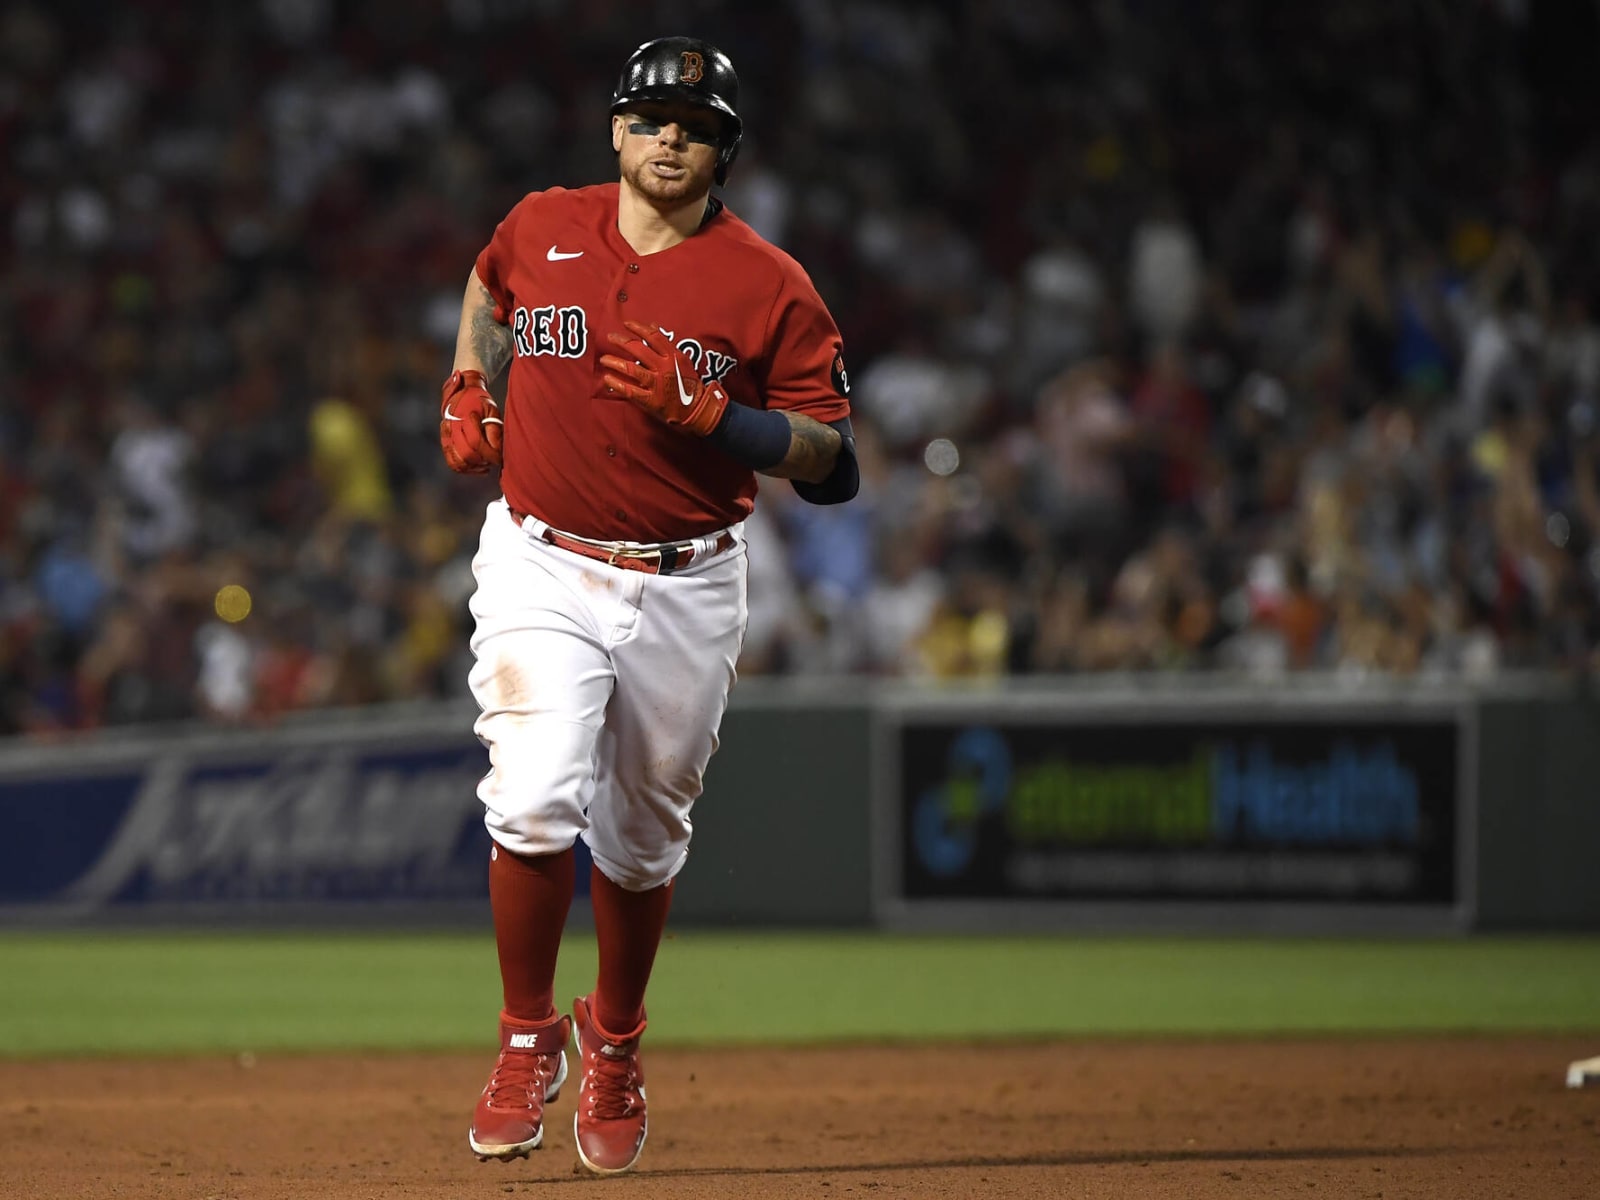 Red Sox trade catcher Christian Vazquez to Astros for two prospects